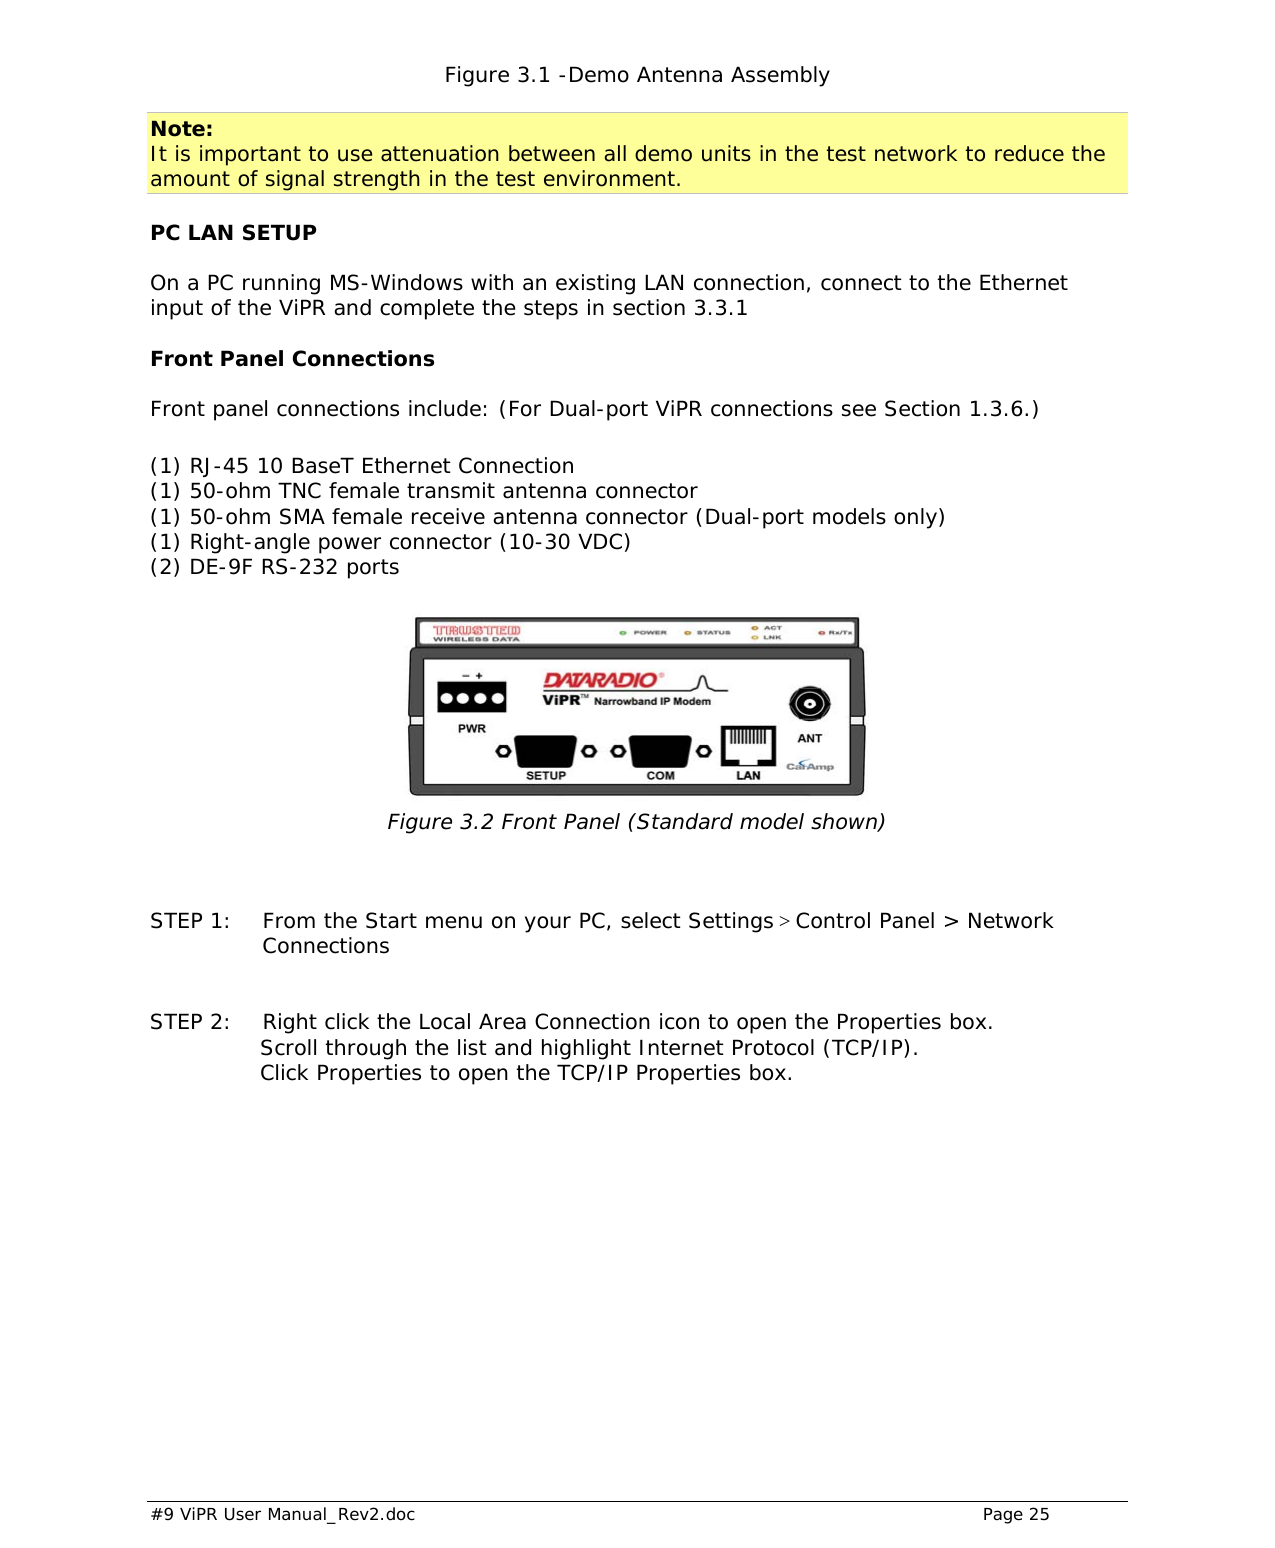  #9 ViPR User Manual_Rev2.doc    Page 25 Figure 3.1 -Demo Antenna Assembly  Note: It is important to use attenuation between all demo units in the test network to reduce the amount of signal strength in the test environment.  PC LAN SETUP On a PC running MS-Windows with an existing LAN connection, connect to the Ethernet input of the ViPR and complete the steps in section 3.3.1  Front Panel Connections Front panel connections include: (For Dual-port ViPR connections see Section 1.3.6.)  (1) RJ-45 10 BaseT Ethernet Connection  (1) 50-ohm TNC female transmit antenna connector  (1) 50-ohm SMA female receive antenna connector (Dual-port models only) (1) Right-angle power connector (10-30 VDC) (2) DE-9F RS-232 ports   Figure 3.2 Front Panel (Standard model shown)    STEP 1:  From the Start menu on your PC, select Settings &gt; Control Panel &gt; Network Connections   STEP 2:  Right click the Local Area Connection icon to open the Properties box.                Scroll through the list and highlight Internet Protocol (TCP/IP).                 Click Properties to open the TCP/IP Properties box.     